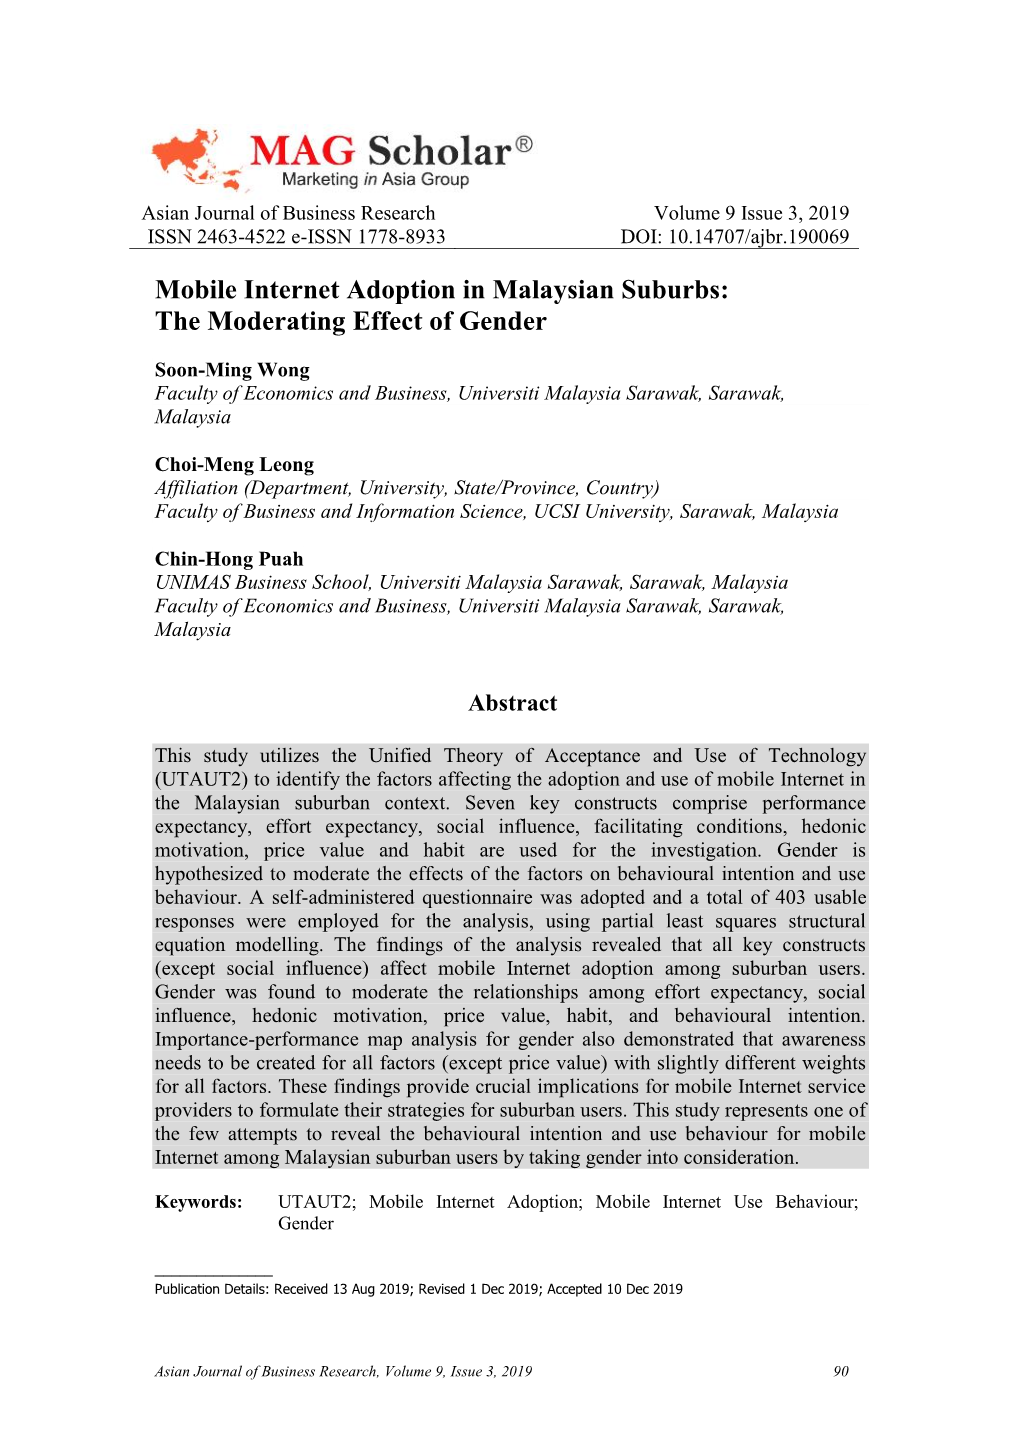 Mobile Internet Adoption in Malaysian Suburbs: the Moderating Effect of Gender